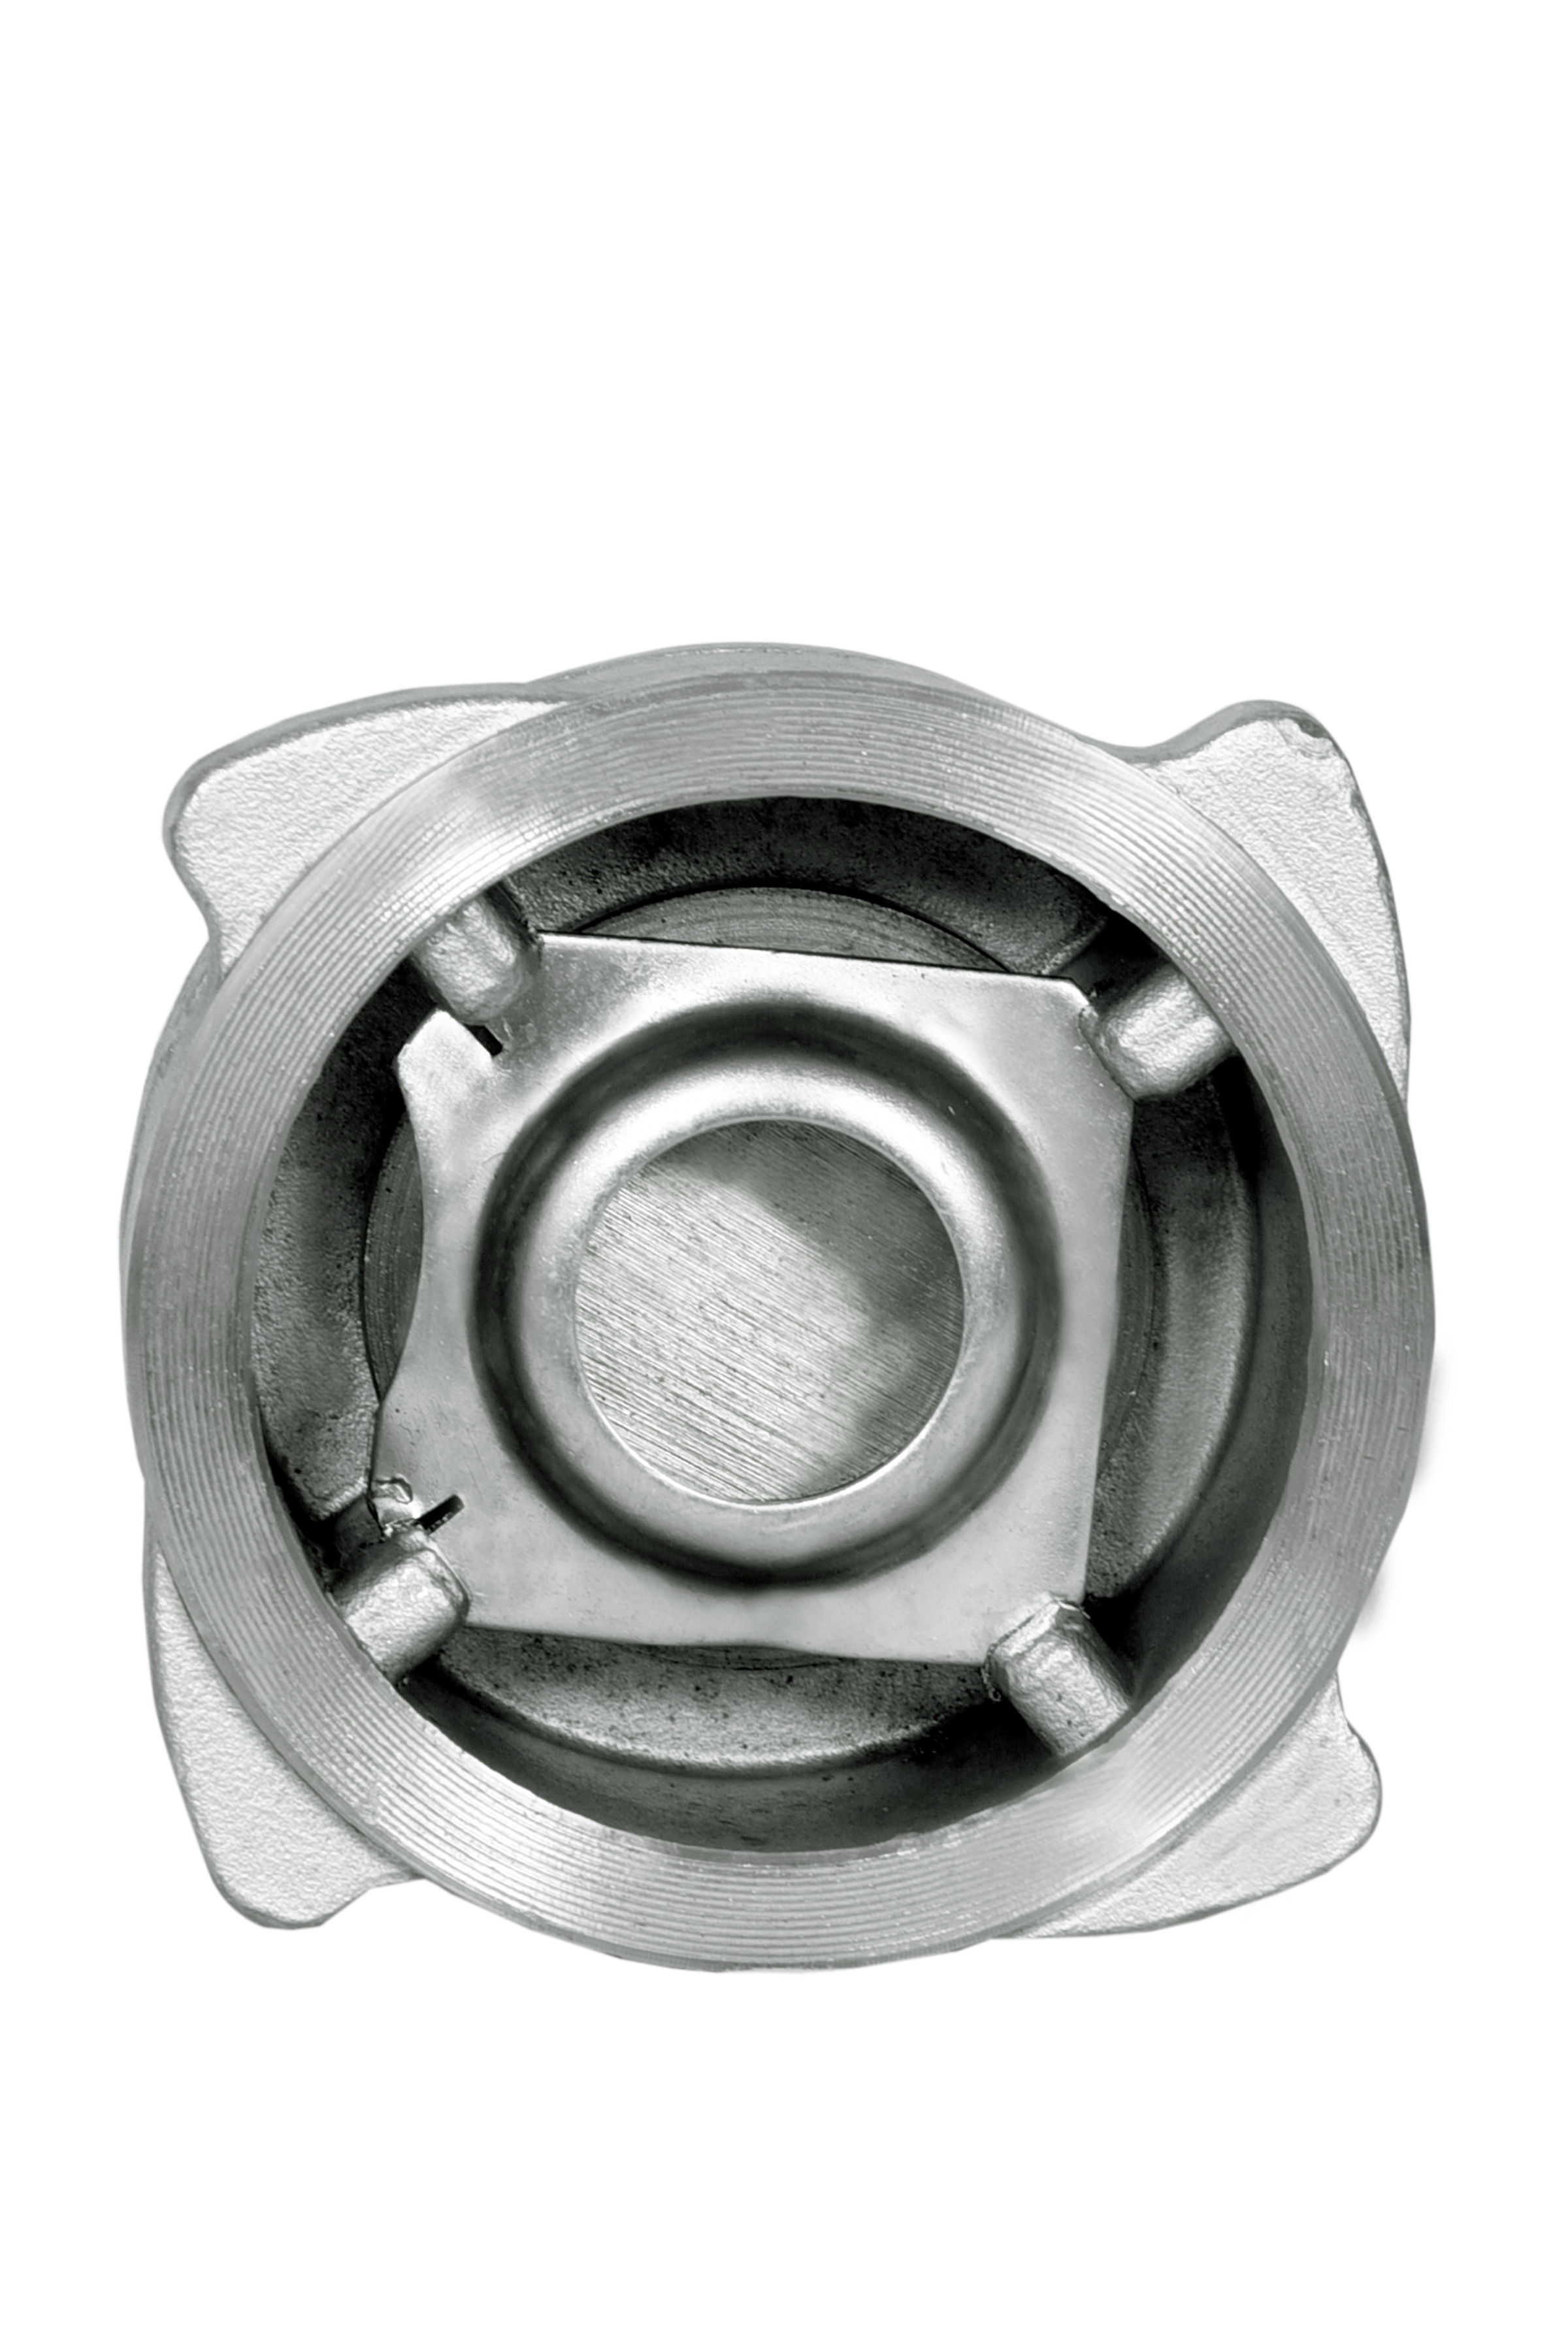 SS Disk Check Valve Manufacturers In Maharashtra